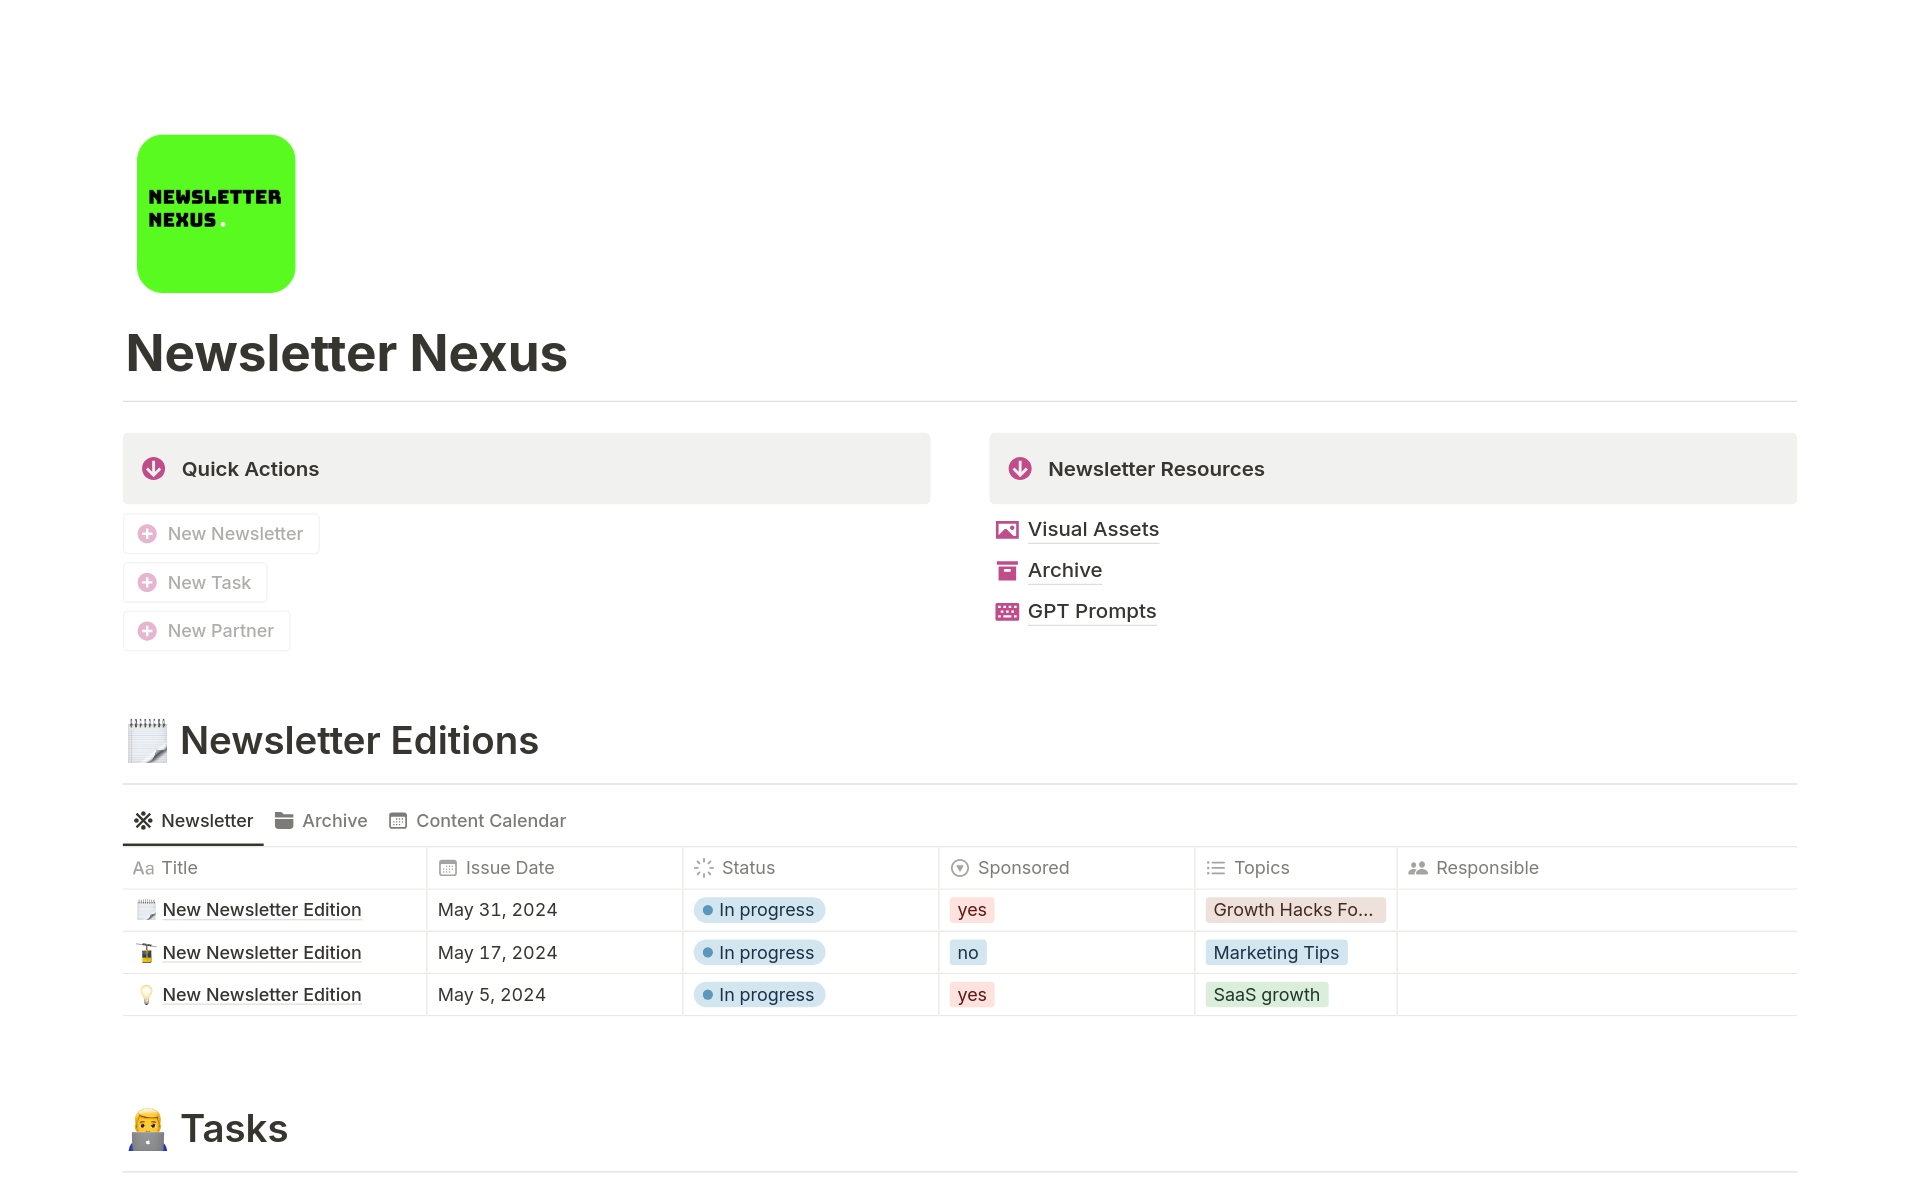 Unlock the potential of your newsletter campaigns with Newsletter Nexus, the dedicated newsletter management template for Notion. This tool simplifies your newsletter operations, allowing you to organize, track, and optimize with ease.